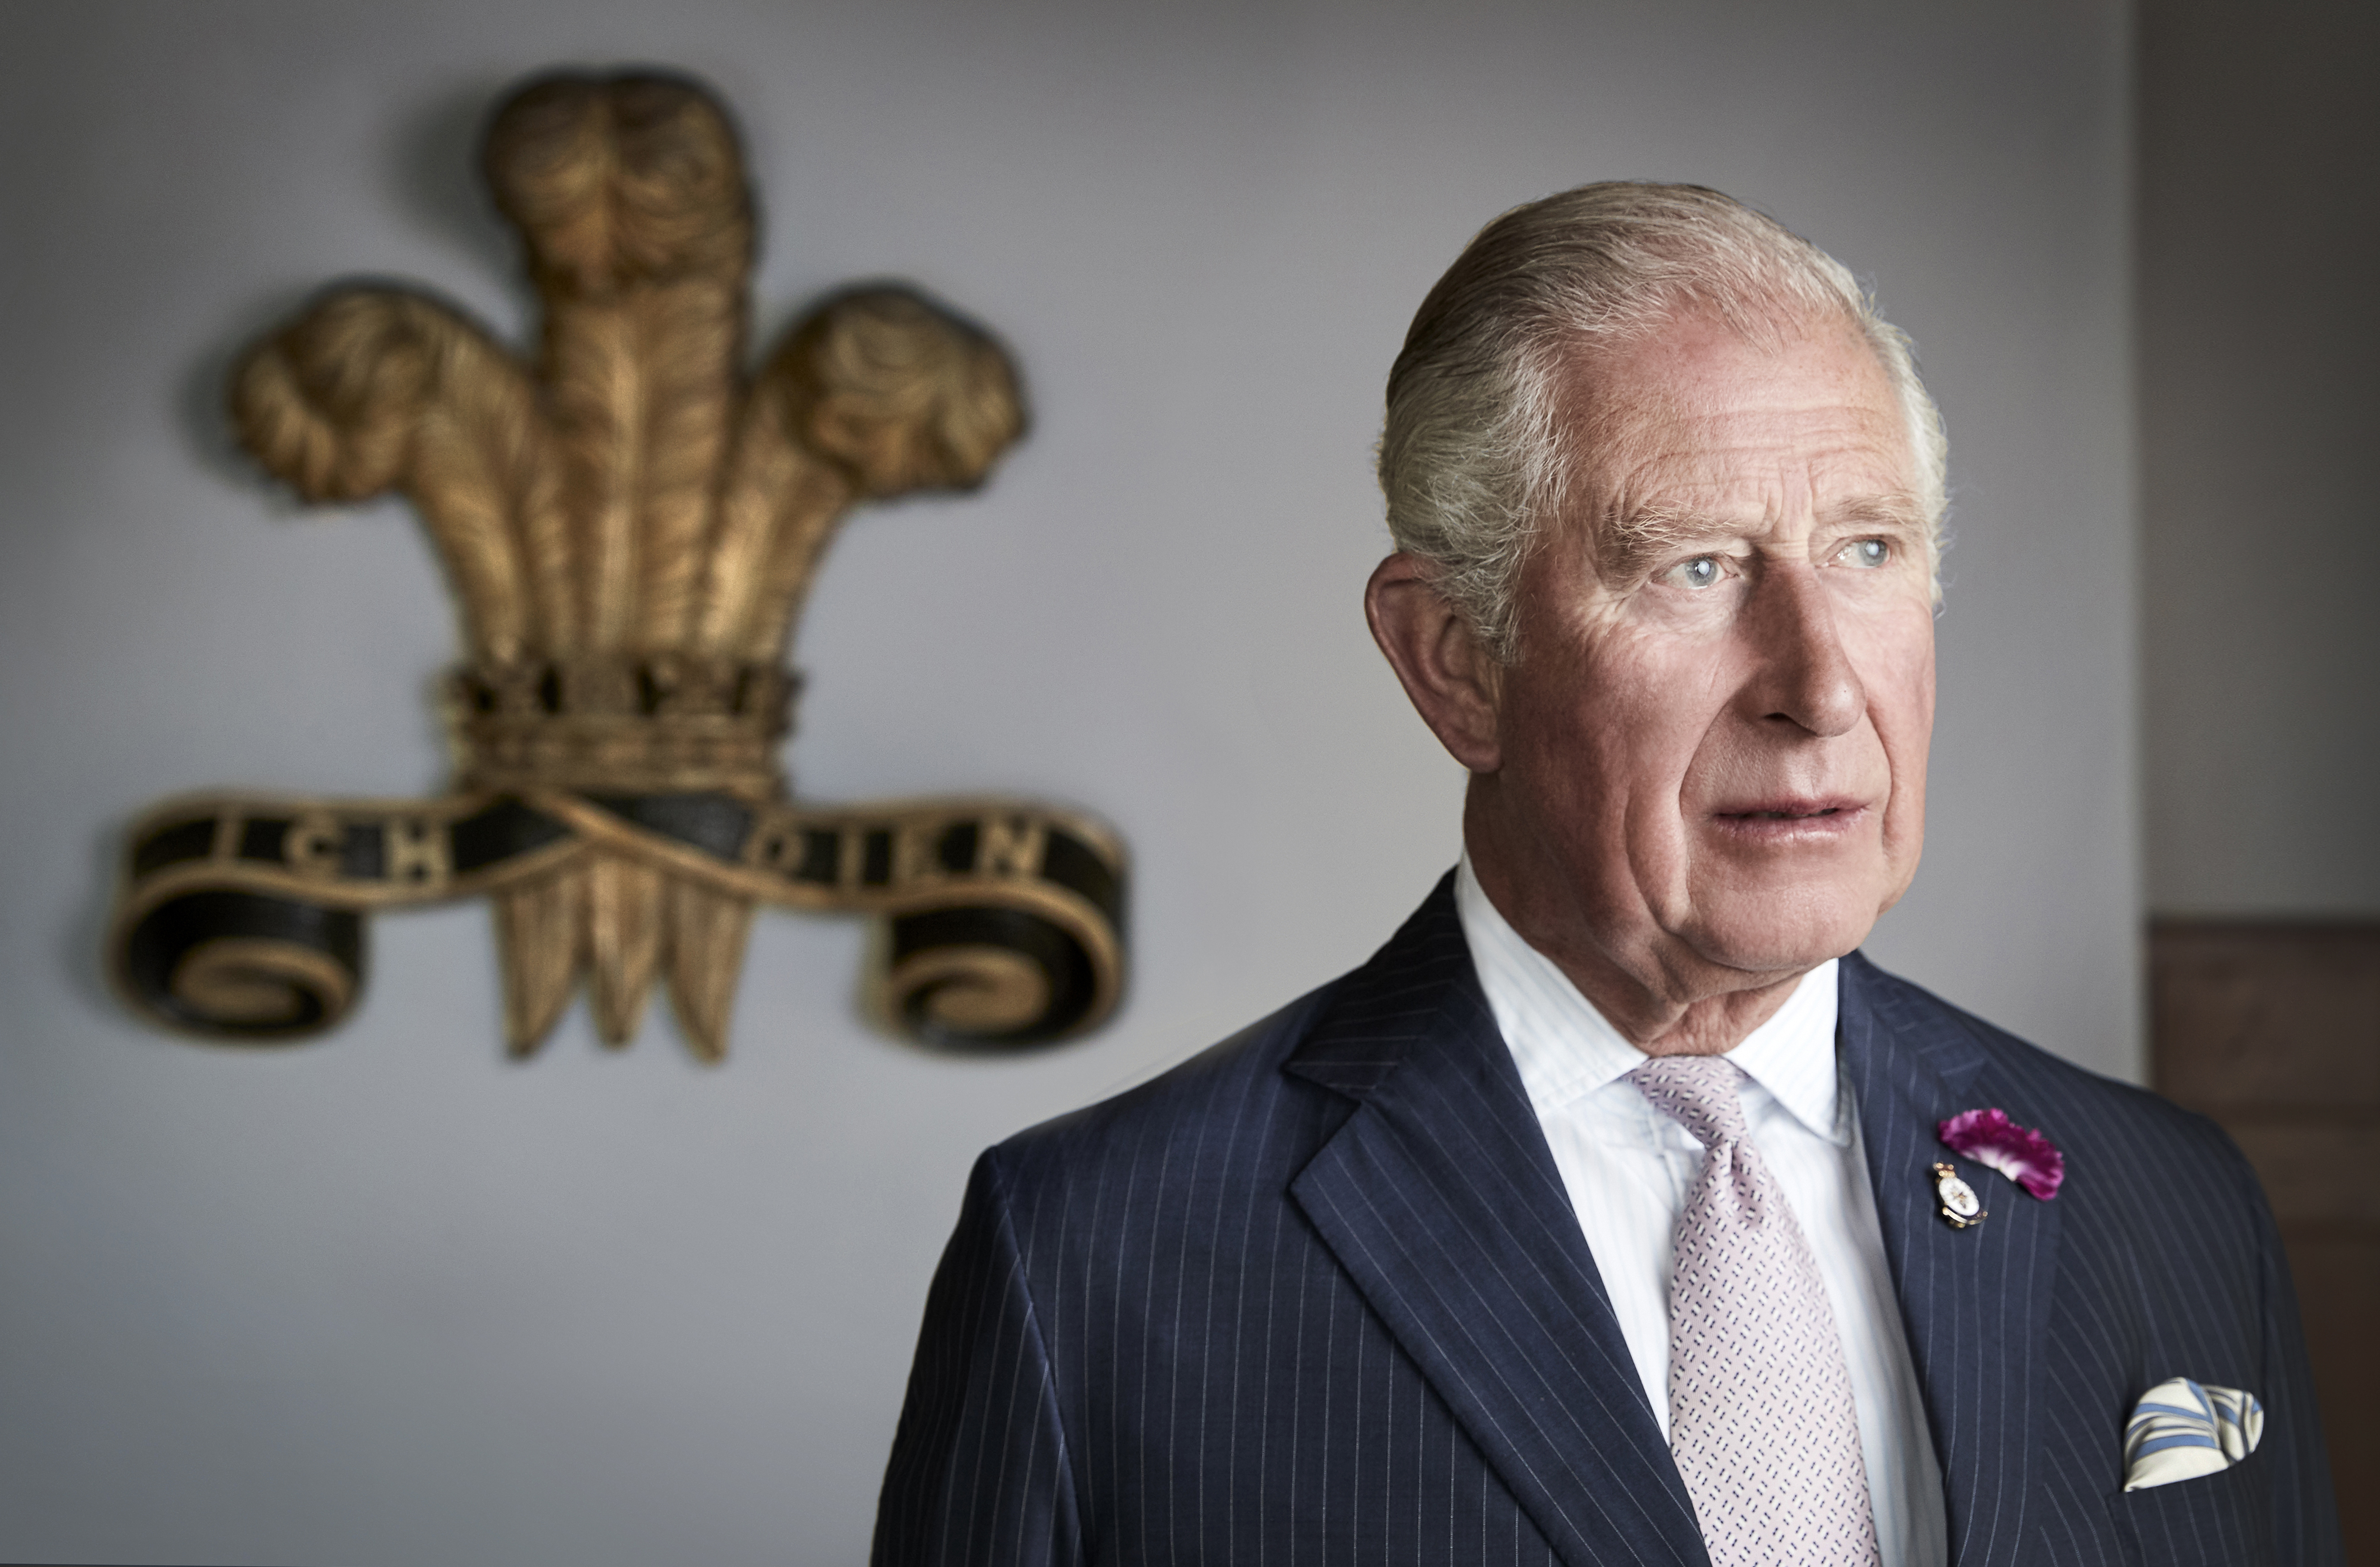 King Charles poses for an official portrait on July 2, 2019 in Myddfai, Wales, United Kingdom | Source: Getty Images